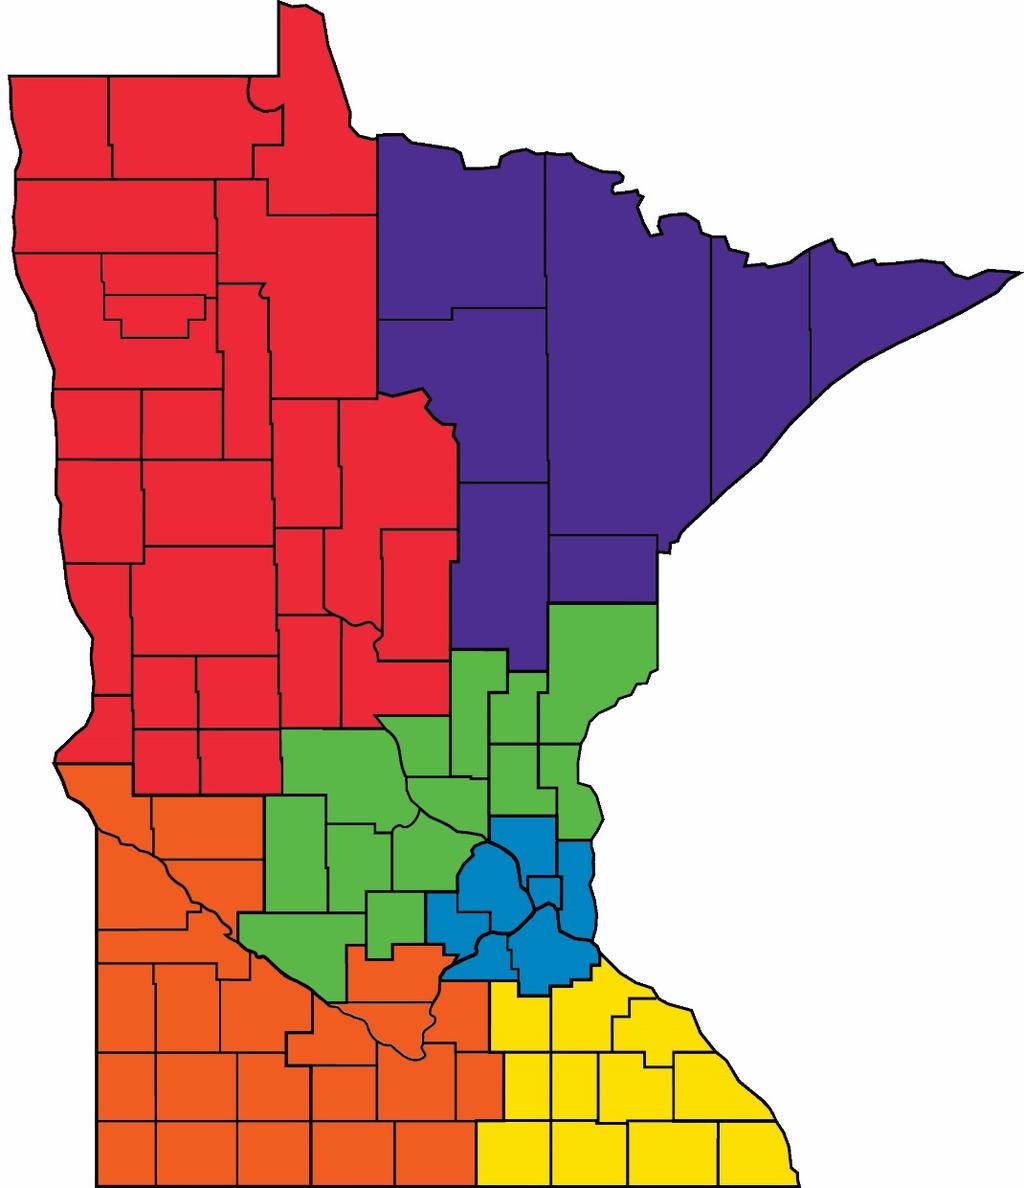 Attachment A Minnesota s Regional Planning Areas EDRs 1, 2, 4, 5 align with WSAs 1 and 2 1 2 EDRs 3 aligns with WSAs 3 and 4 EDRs 6e, 7w, 7e align